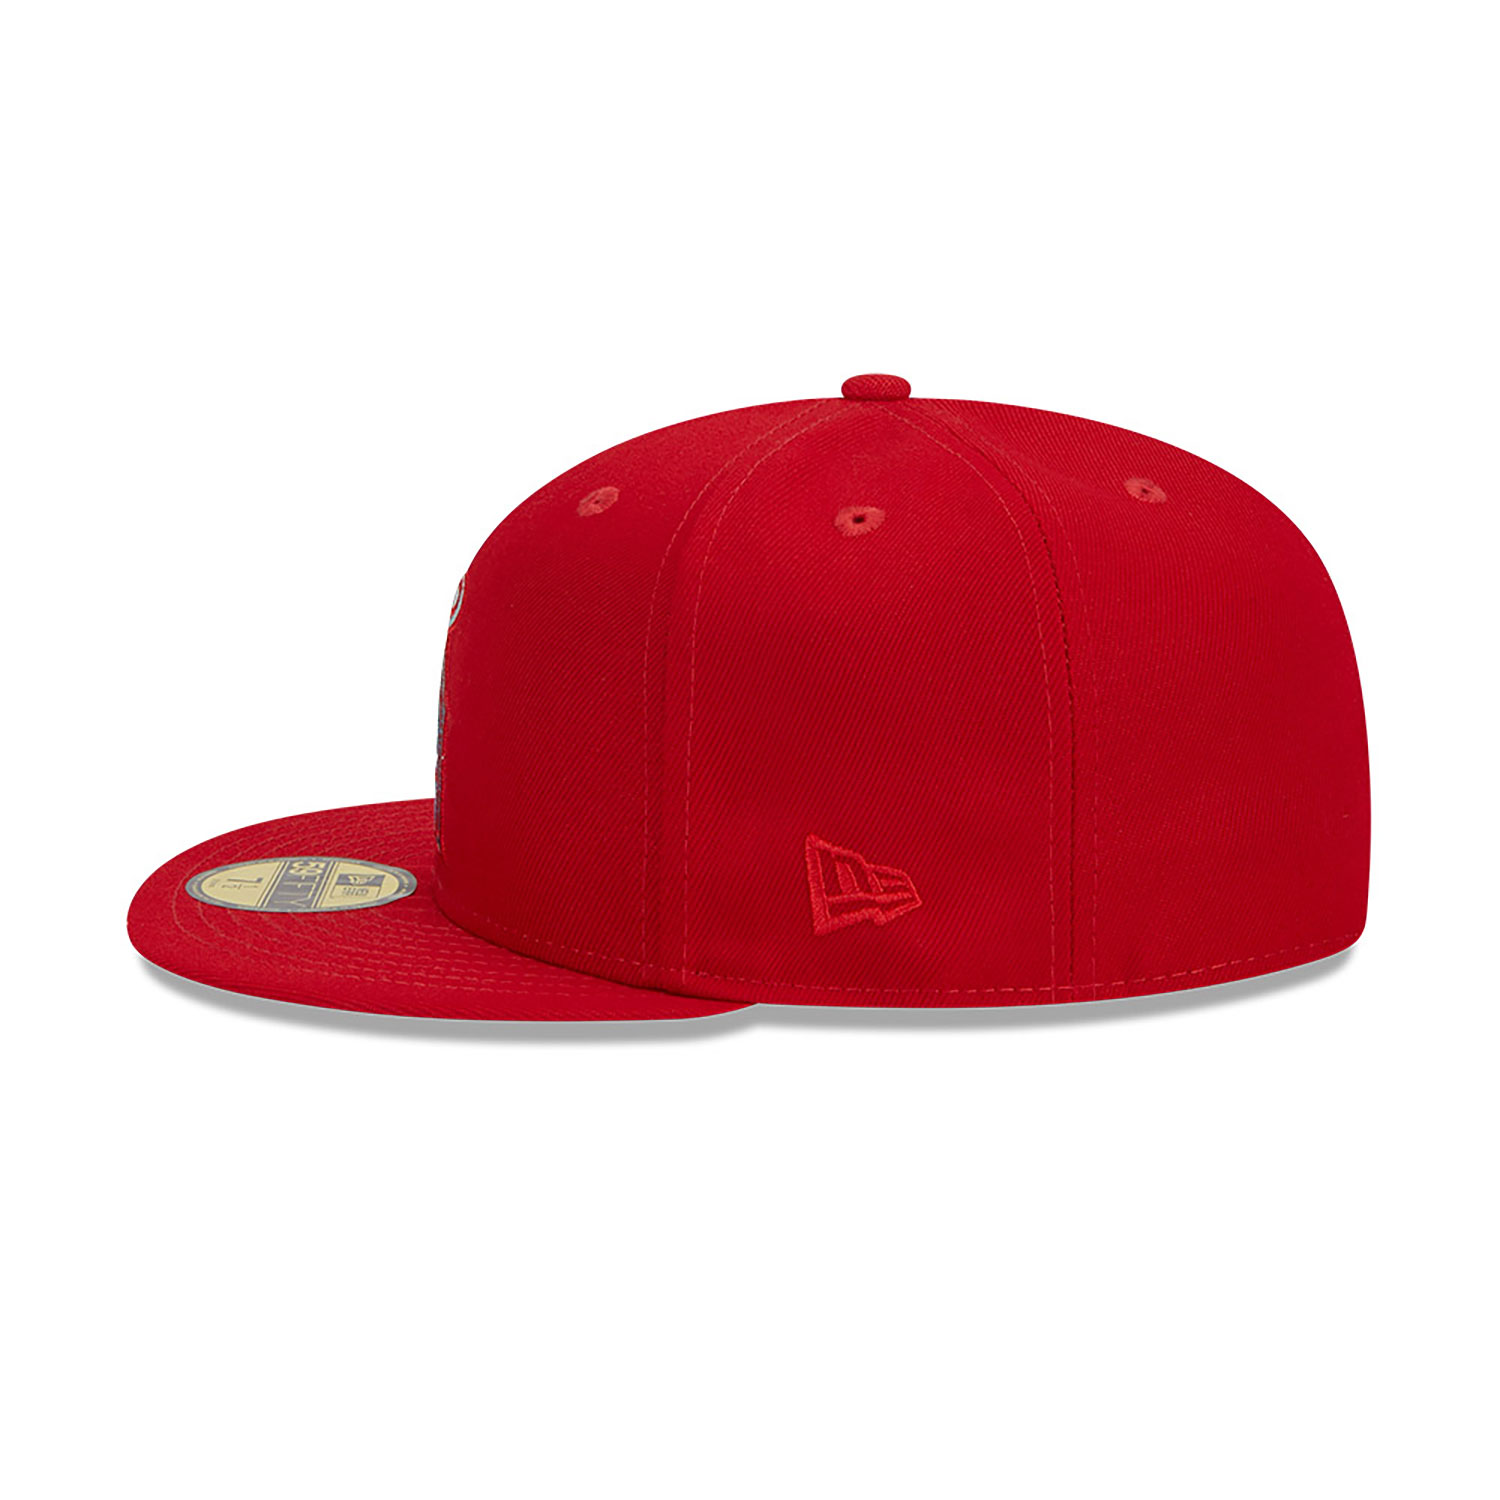 Anaheim Angels Gradient Red 59FIFTY Fitted Cap